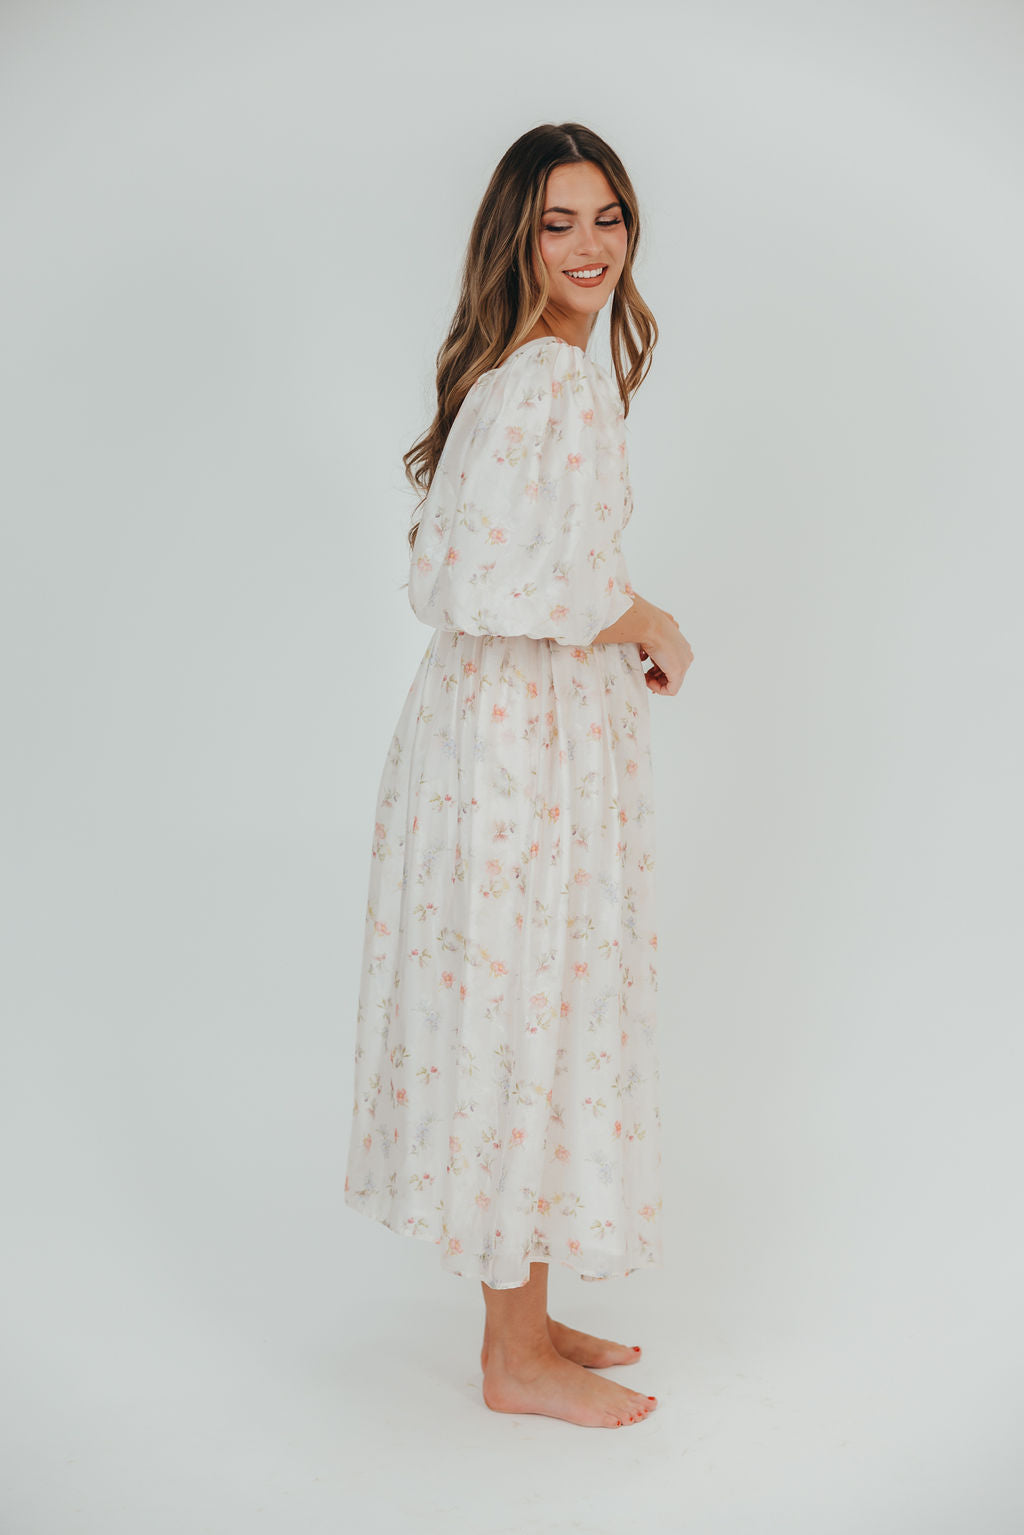 Harlow Maxi Dress in Tiny Pink Floral - Bump Friendly & Inclusive Sizing (S-3XL)